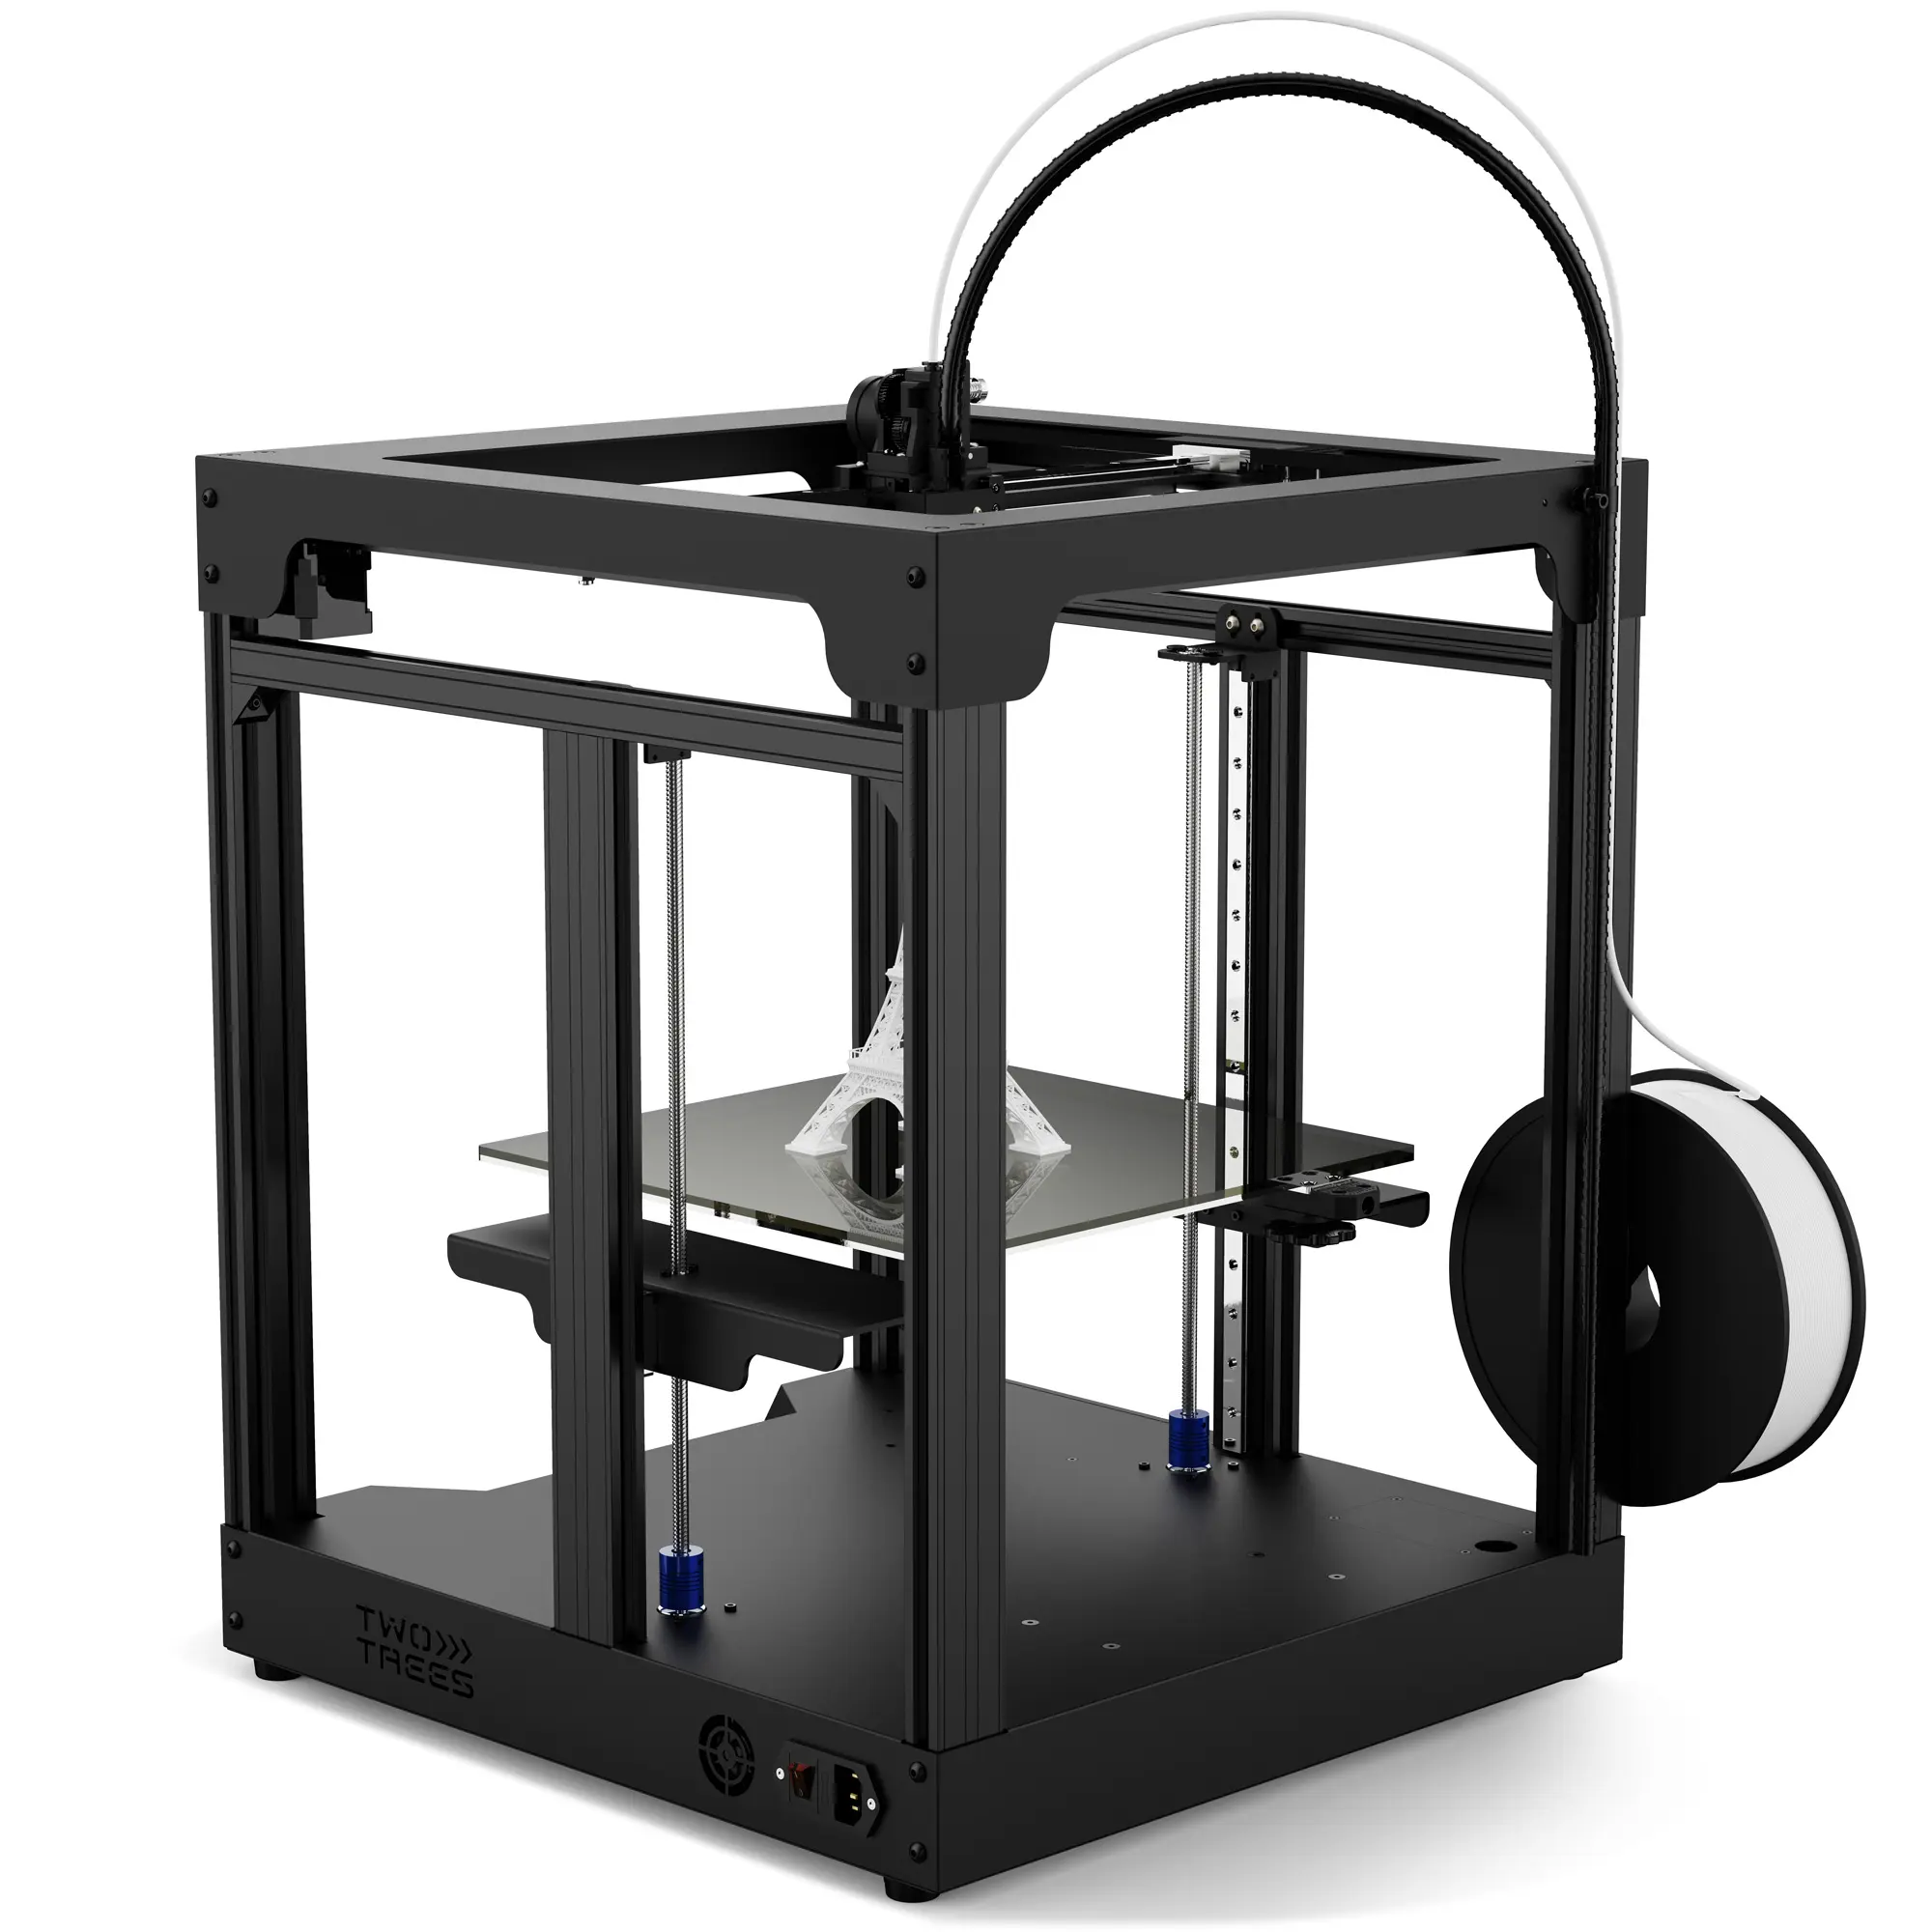 TWOTREES SP-5 3D Printer high quality hot-selling newly developed large core xy FDM 3d printer machine